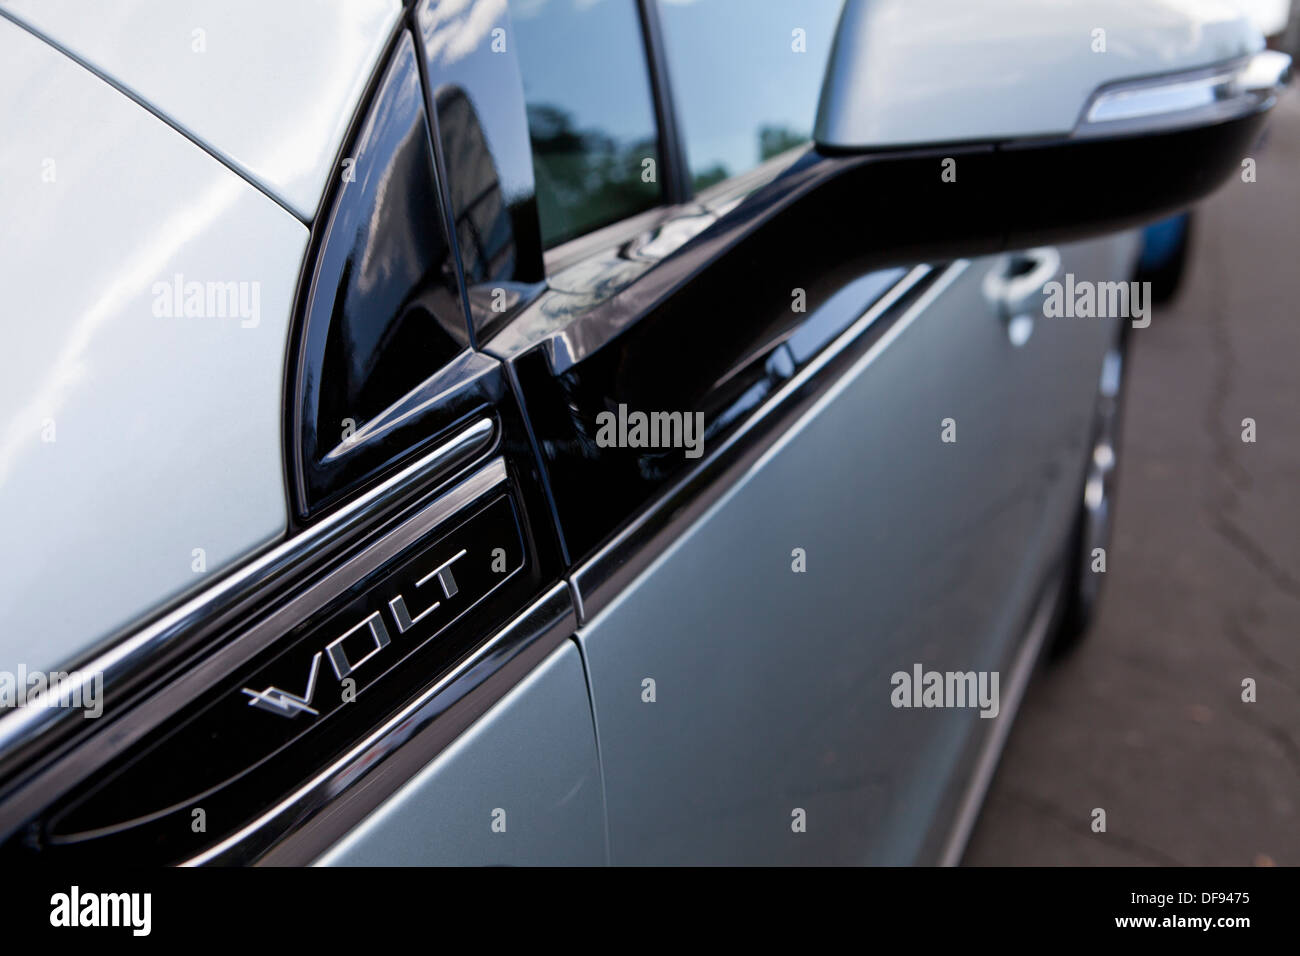 Chevy Volt electric hybrid car badging Stock Photo